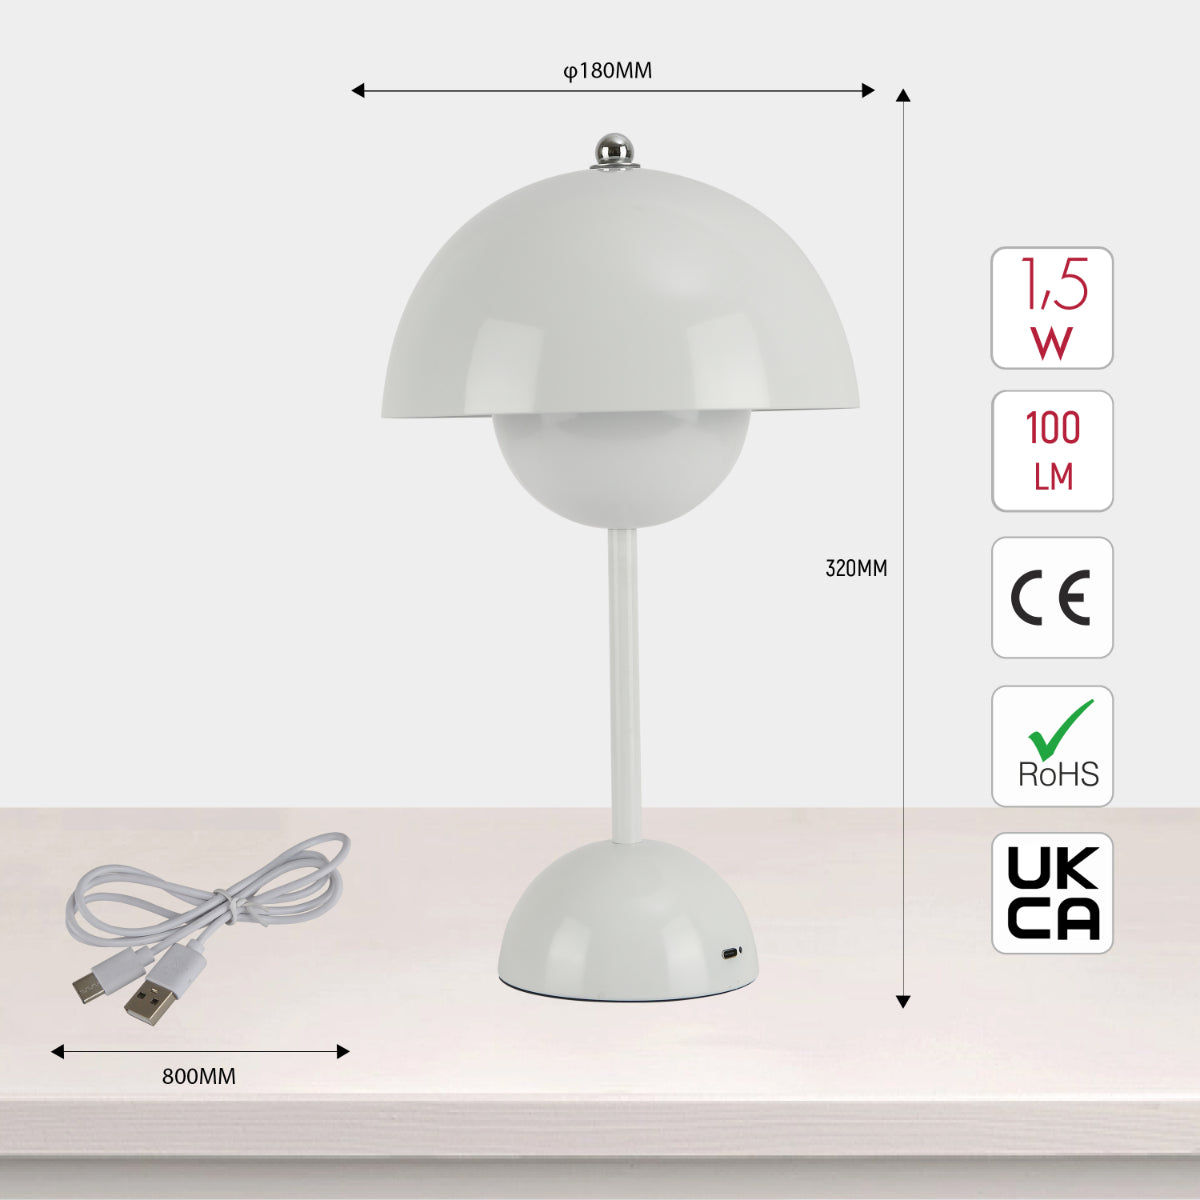 Size and certifications of Spherical Harmony LED Table Lamp – Dual-Color Elegance 130-03734